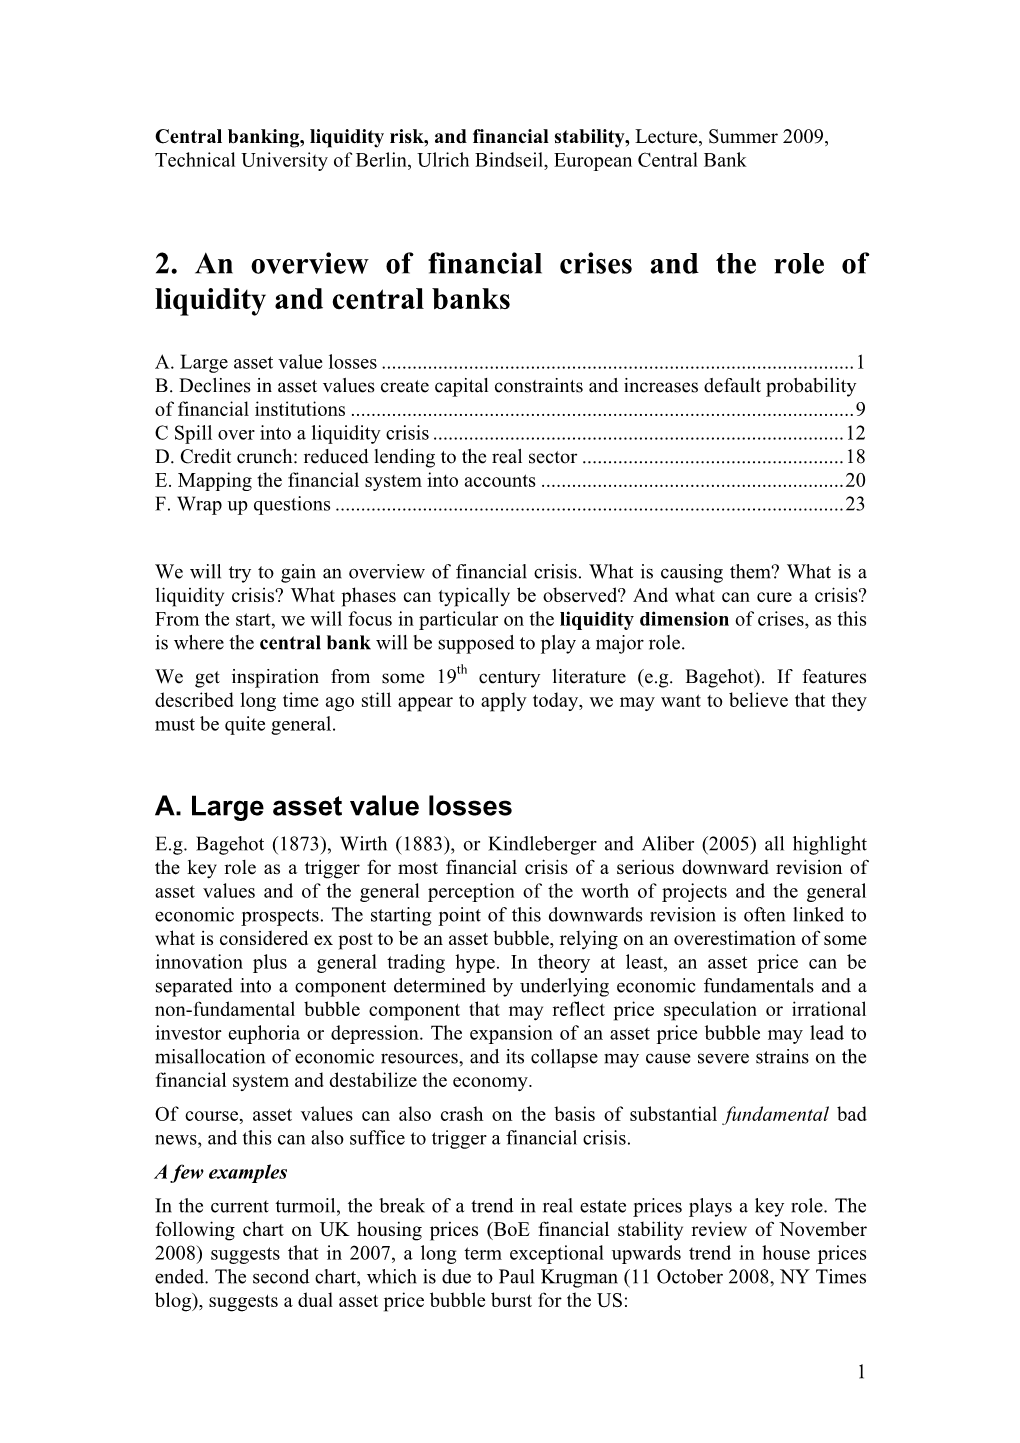 Central Banking, Liquidity Risk, and Financial Stability, Lecture, Summer 2009, Technical University of Berlin, Ulrich Bindseil, European Central Bank